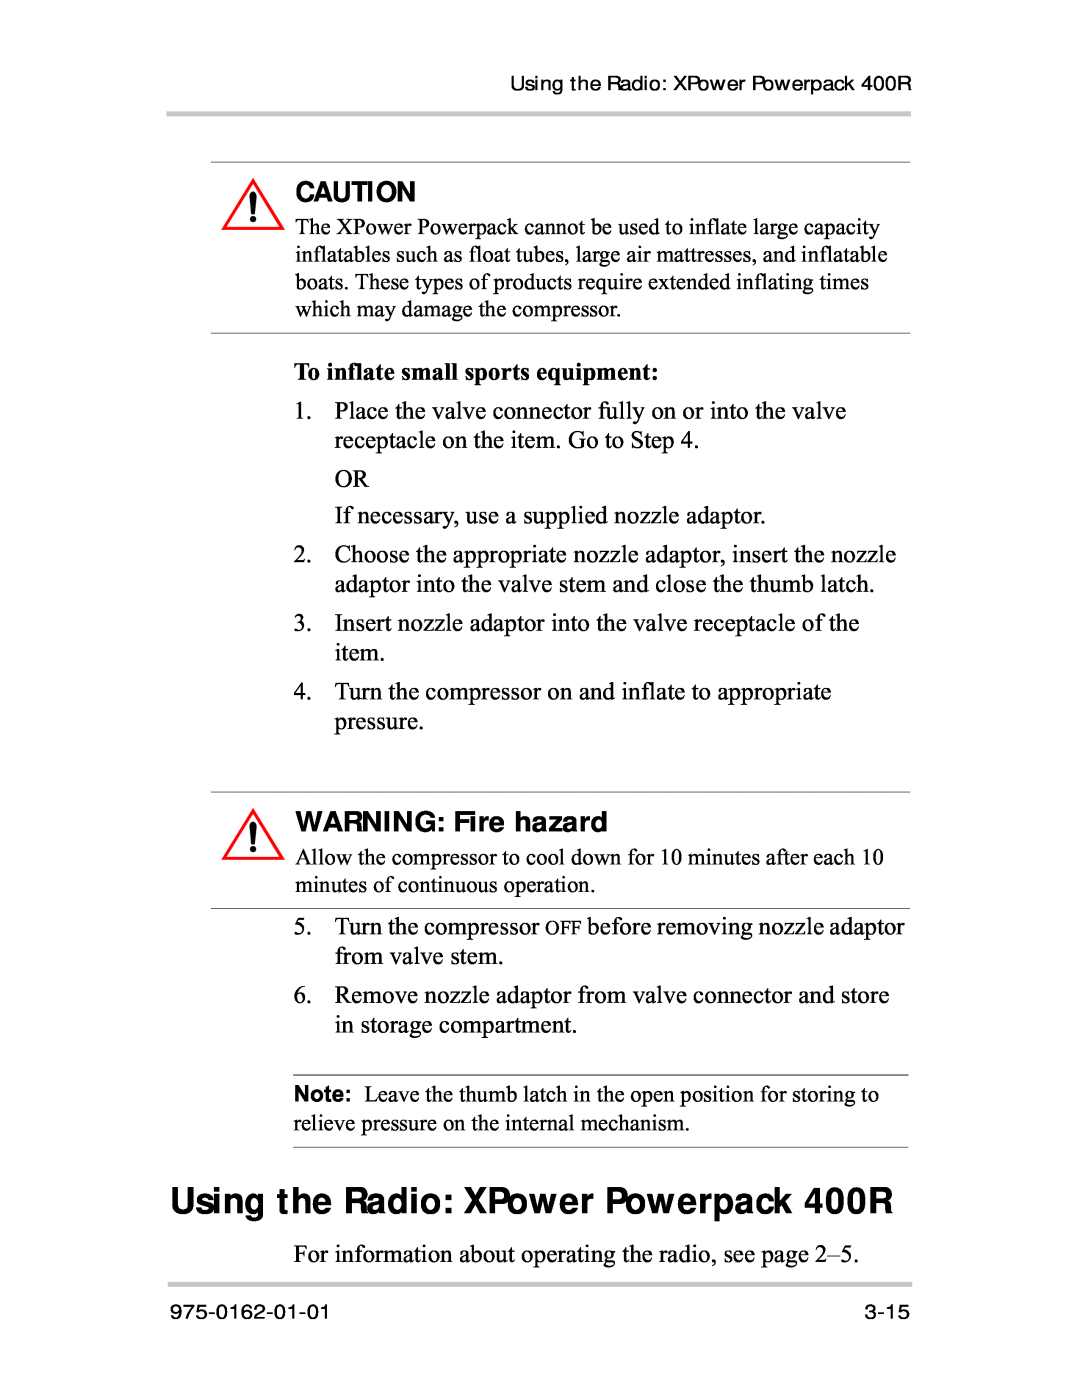 Xantrex Technology manual Using the Radio XPower Powerpack 400R, To inflate small sports equipment, WARNING Fire hazard 